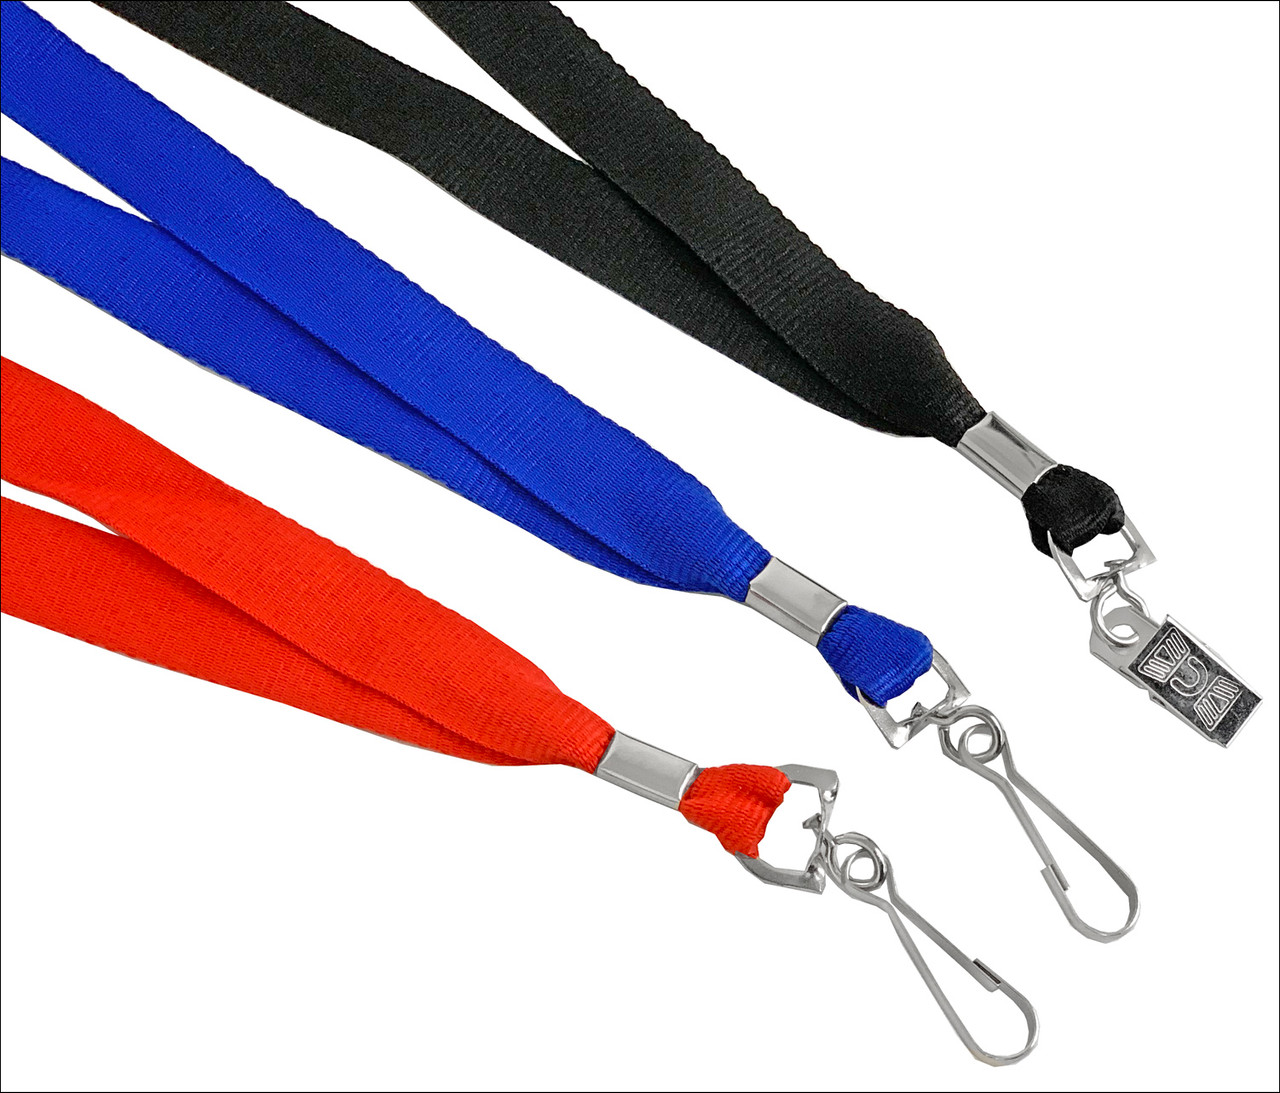 3/4" Wide Lanyard with Hook or Clip